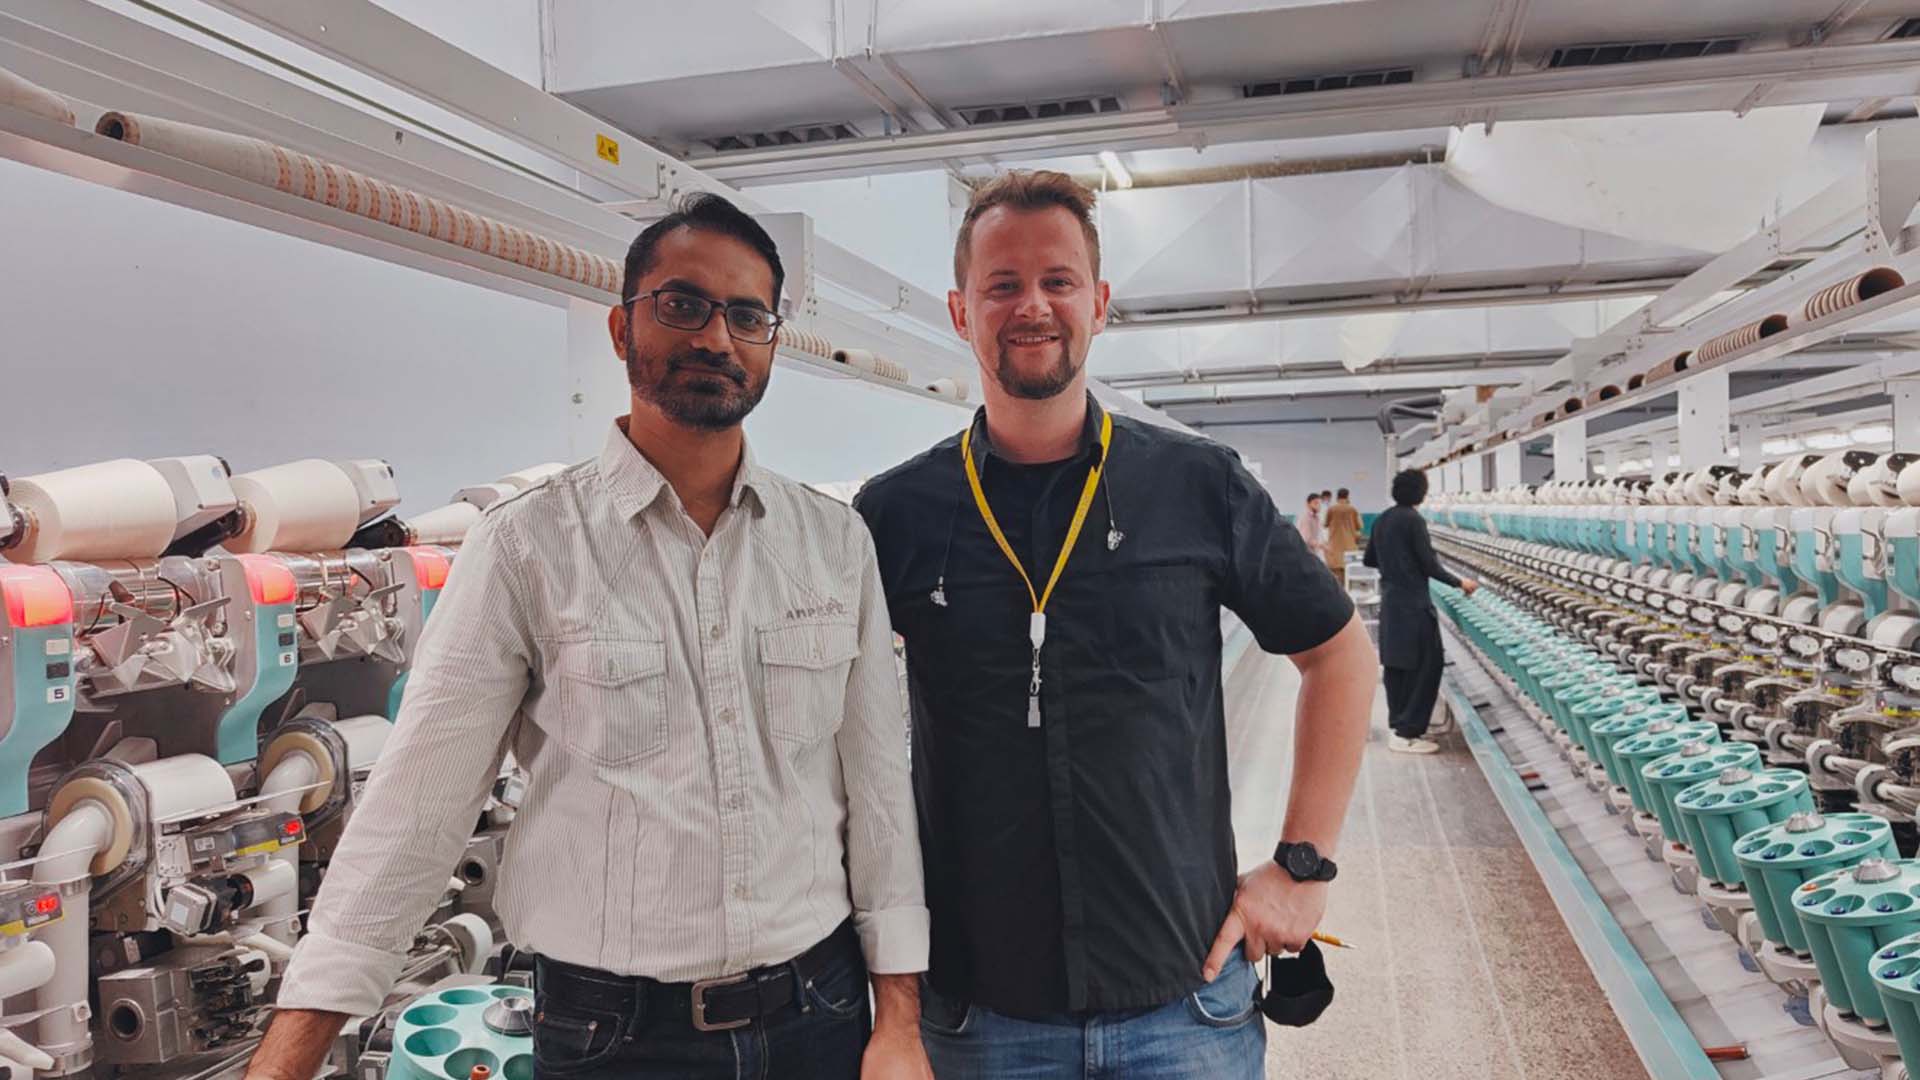 Umair Mansoor, service manager for Service Traders and Loepfe service manager Martin Bace. © Loepfe